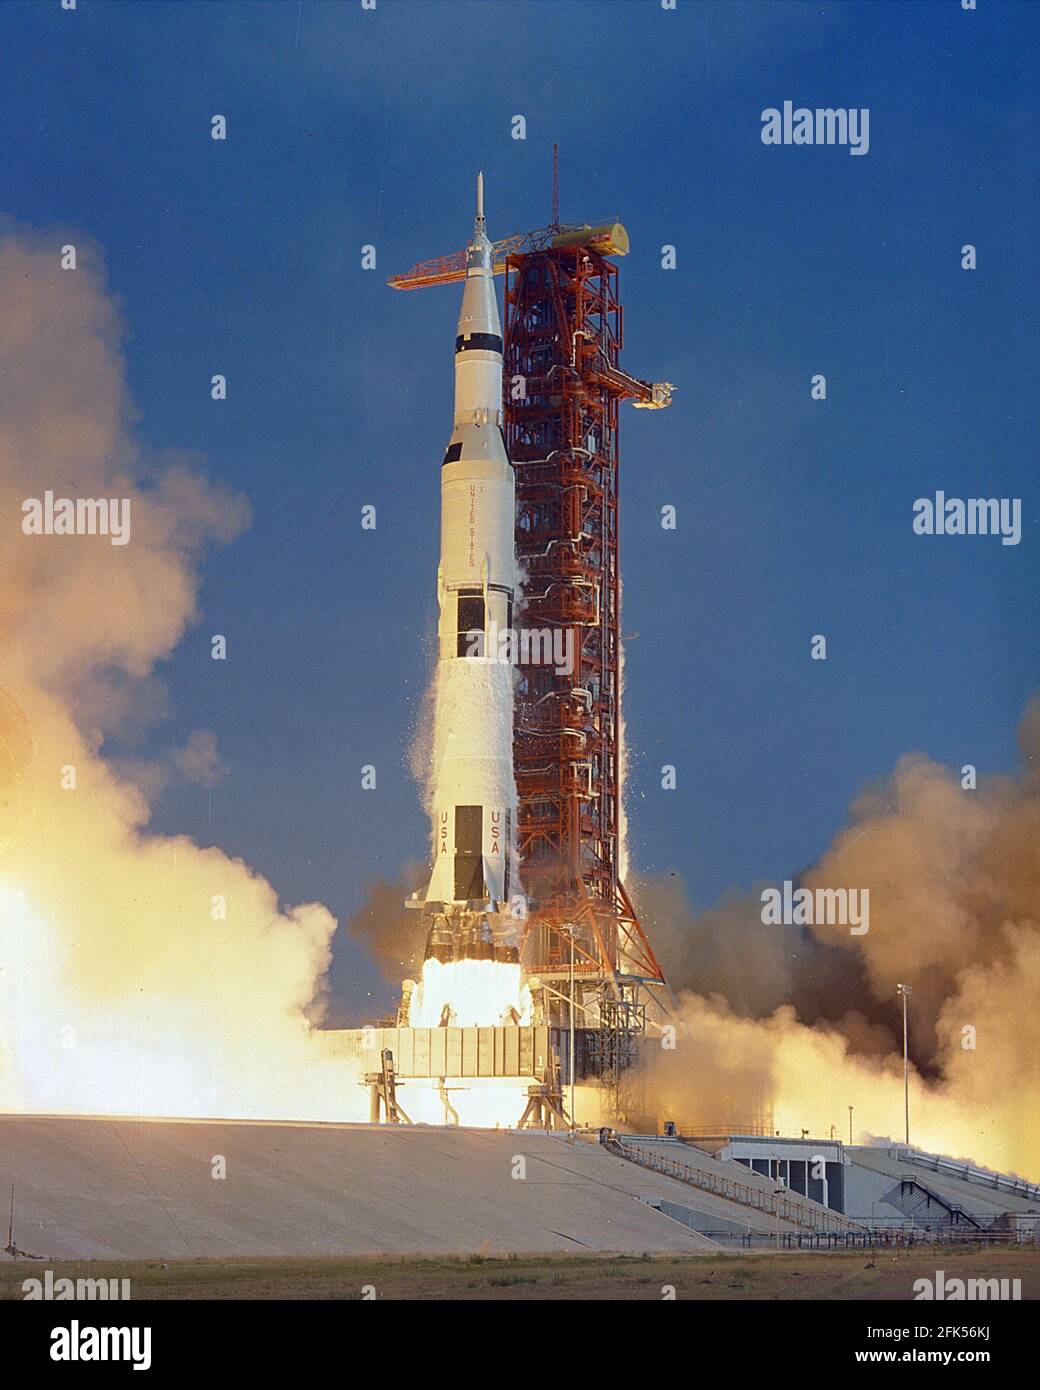 Cape Canaveral, FL - (FILE) -- The Apollo 11 Saturn V space vehicle lifts off with astronauts Neil A. Armstrong, Michael Collins and Edwin E. Aldrin, Jr., at 9:32 a.m. EDT, Wednesday, July 16, 1969, from Kennedy Space Center's Launch Complex 39A.Credit: NASA via CNP. /MediaPunch Stock Photo